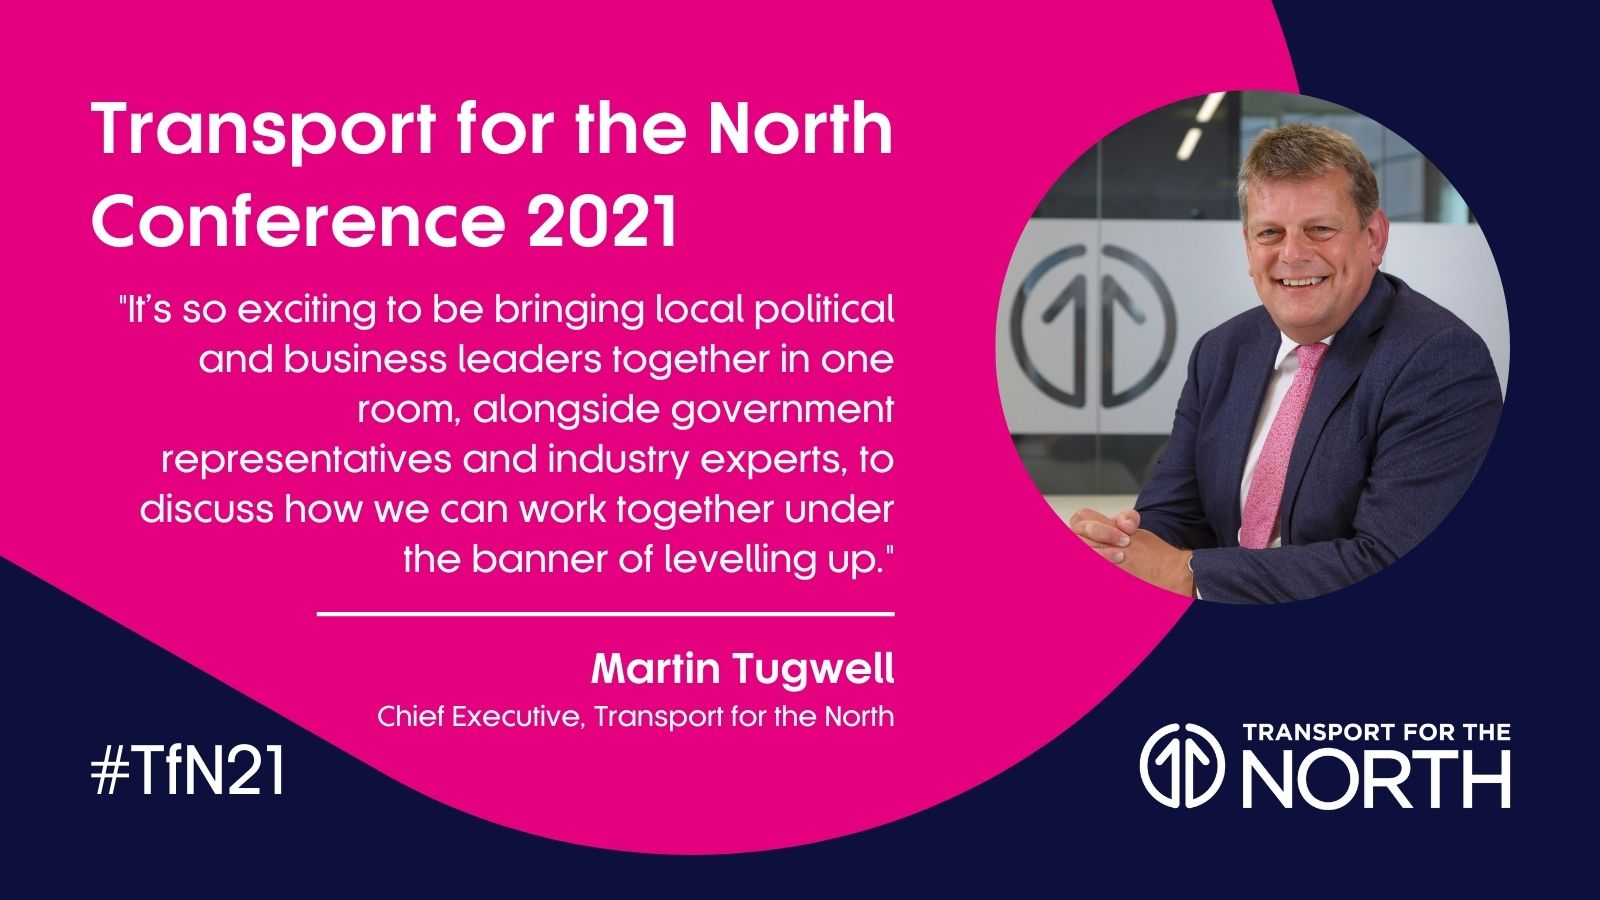 Martin Tugwell speaker quote ahead of Transport for the North annual conference 2021